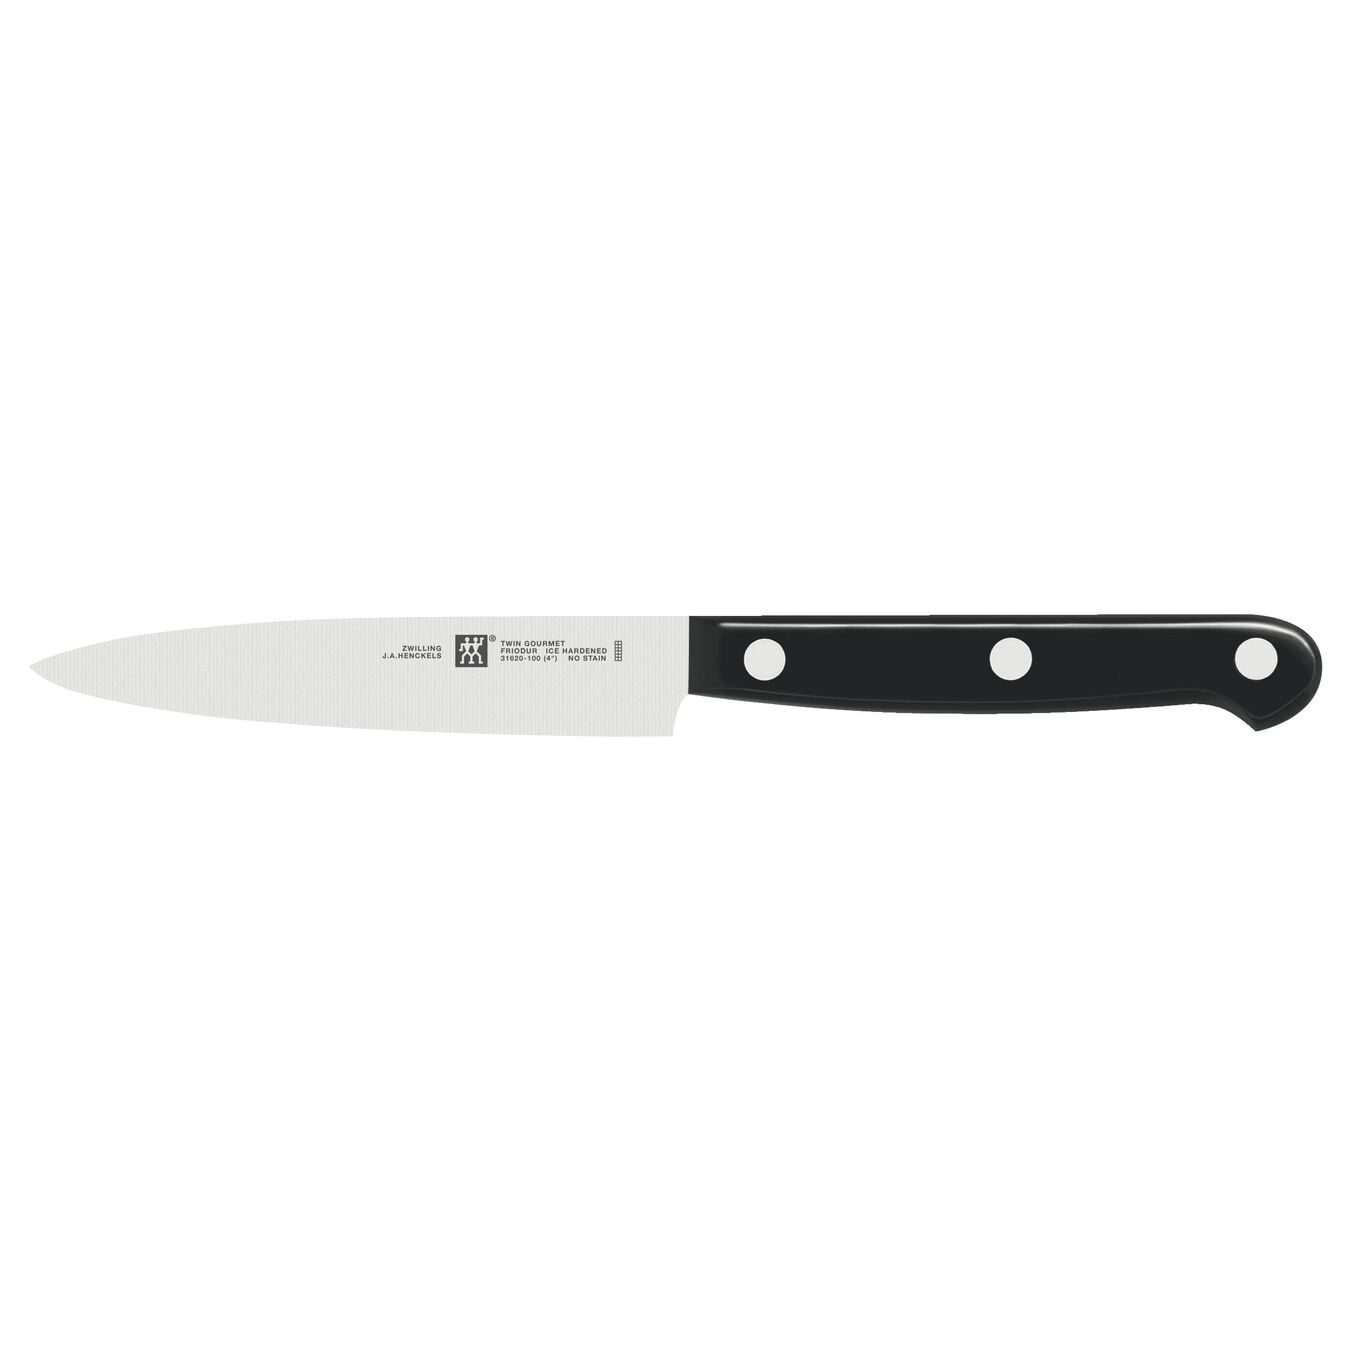 4 inch Paring knife - Visual Imperfections,,large 3